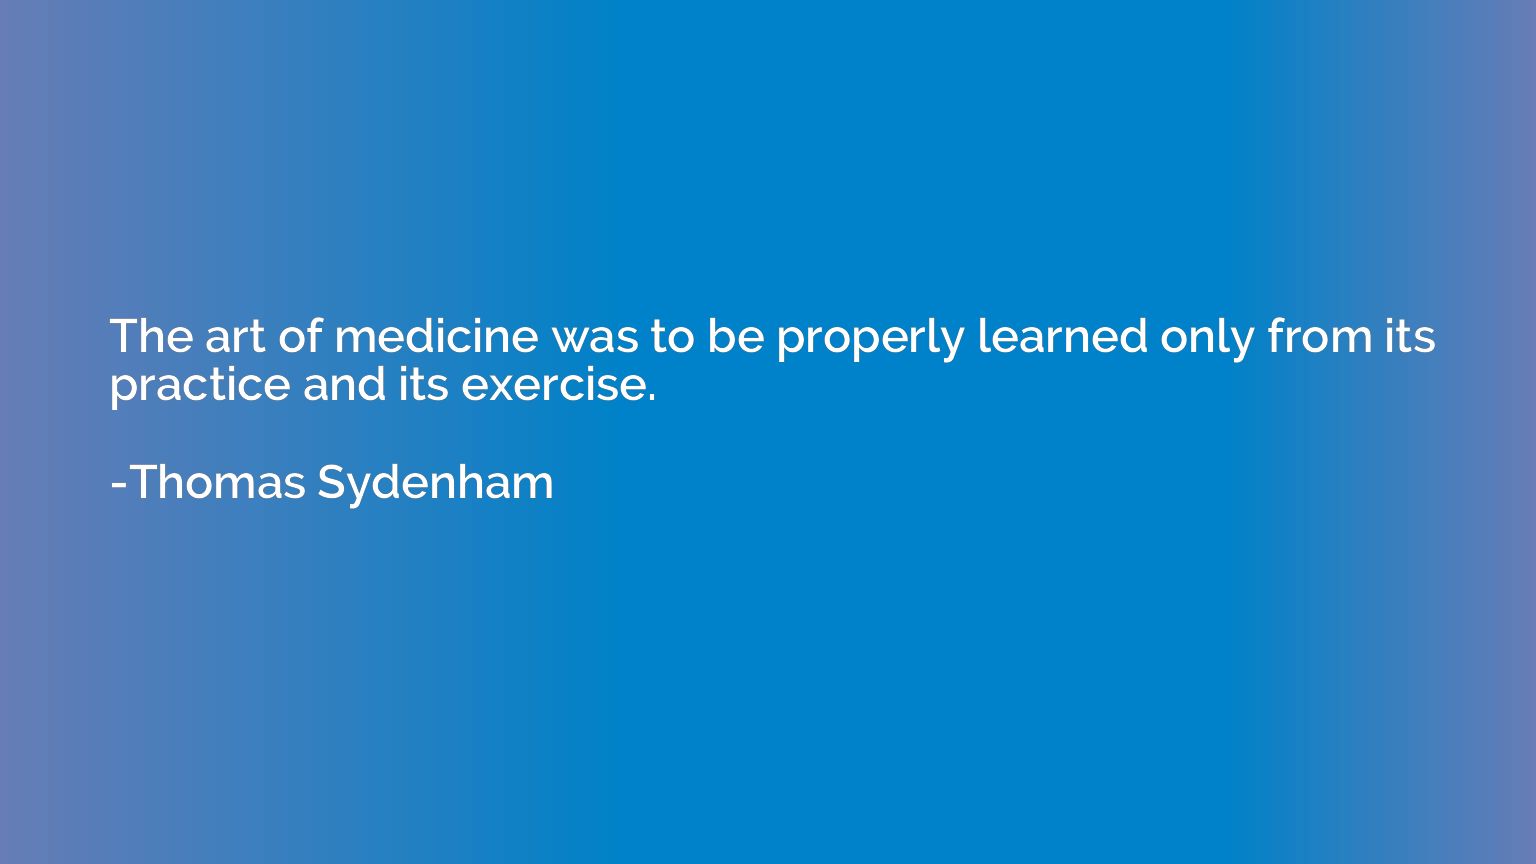 The art of medicine was to be properly learned only from its